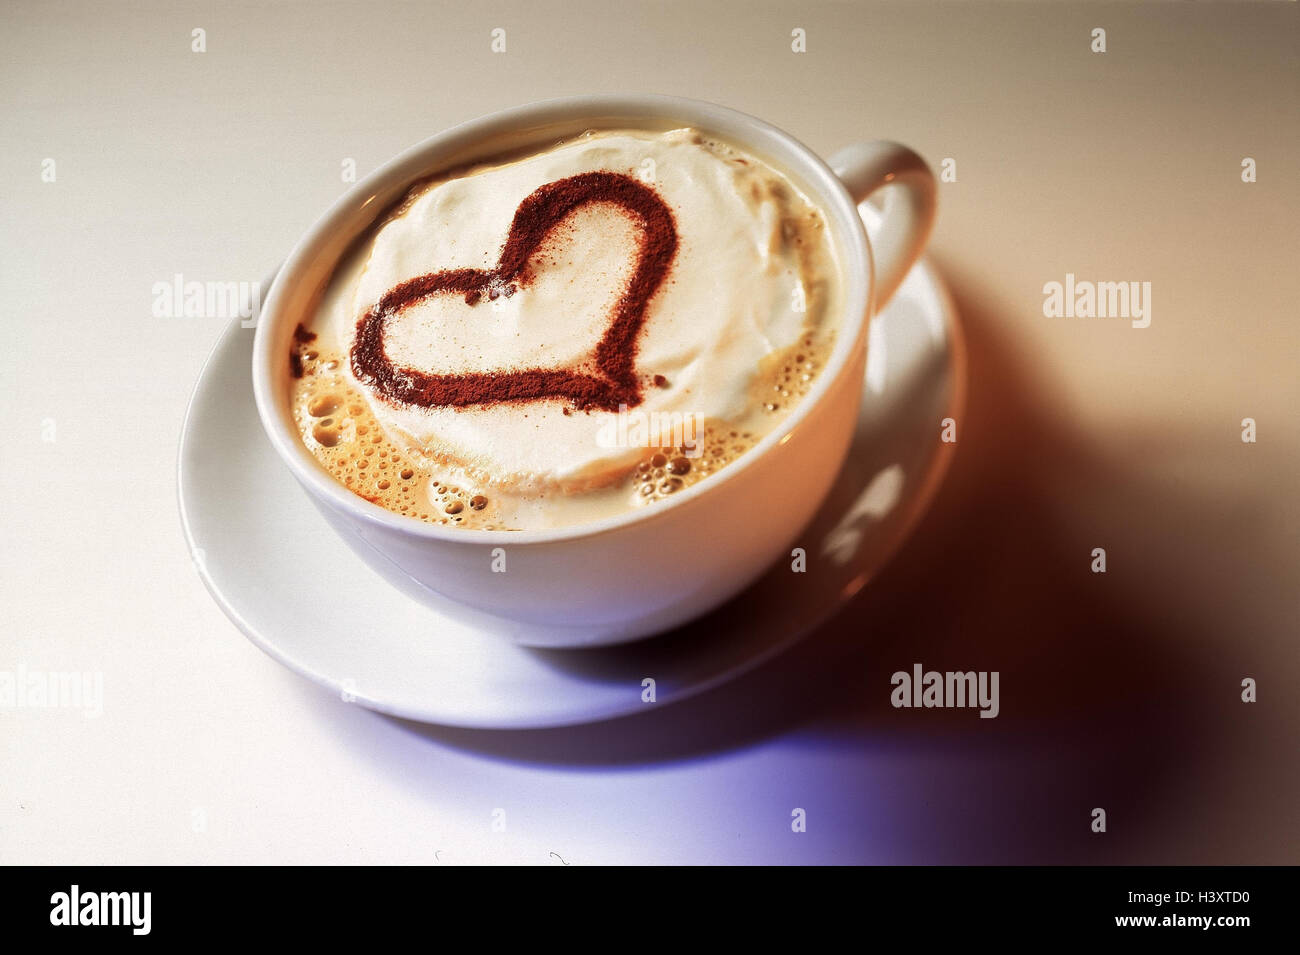 Cup, cappuccino, froth, heart coffee, coffee drink, in Italian, drink, alcohol-free Stock Photo